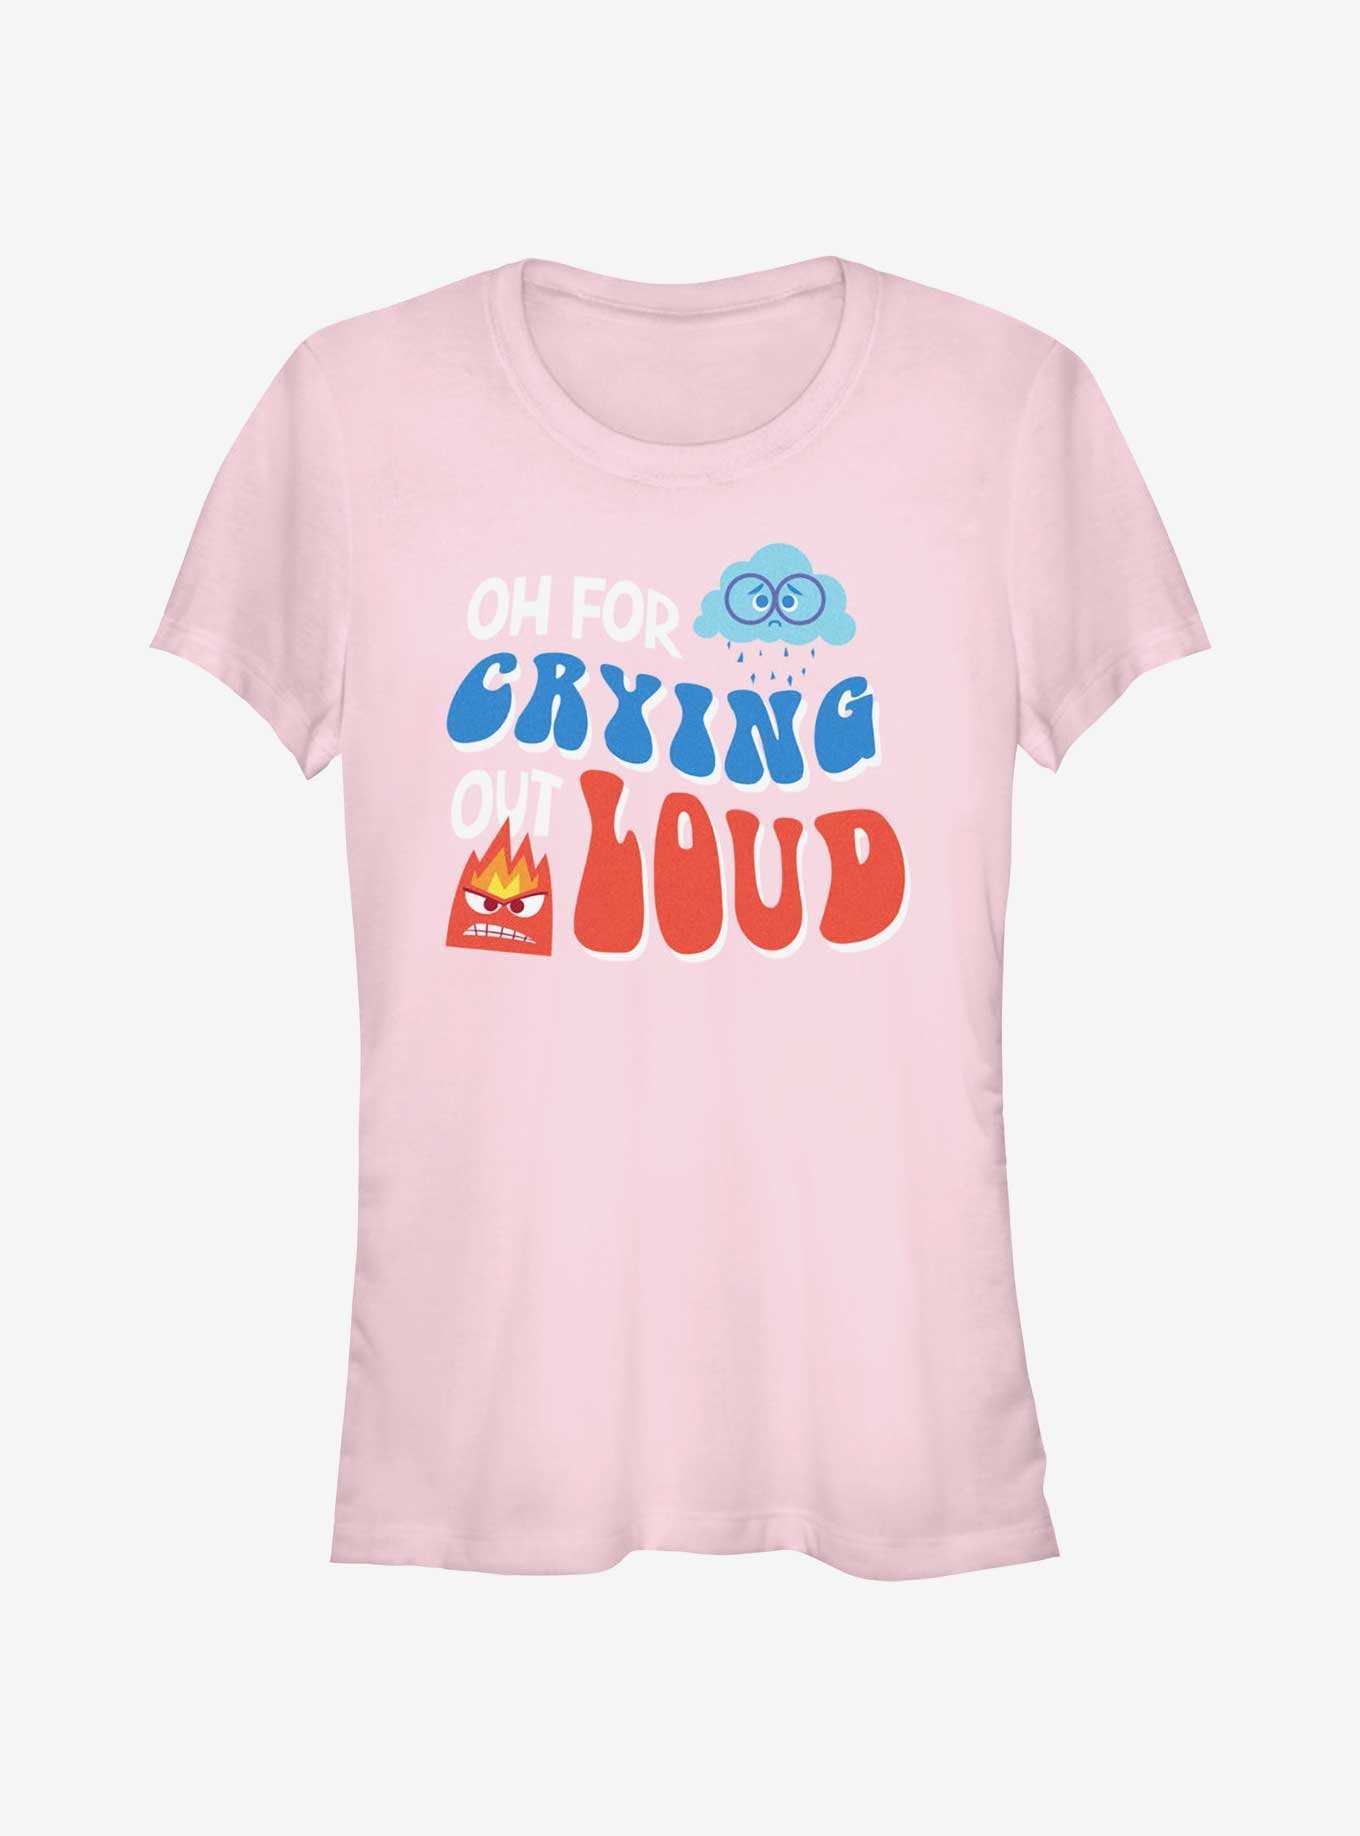 Disney Pixar Inside Out 2 Crying Out Loud Girls T-Shirt, , hi-res